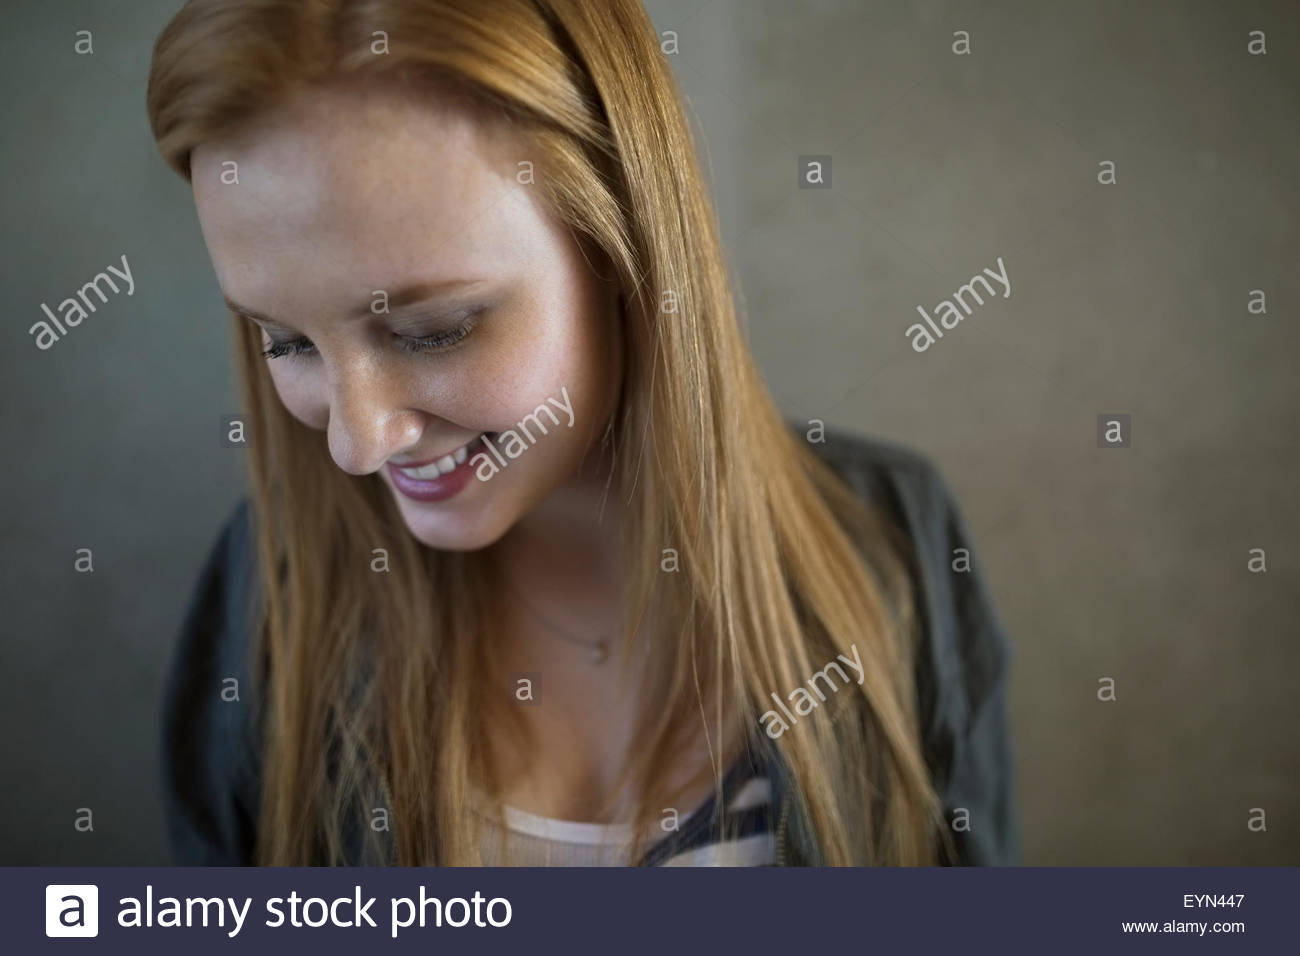 Portrait of smiling young woman red hair looking down Banque D'Images